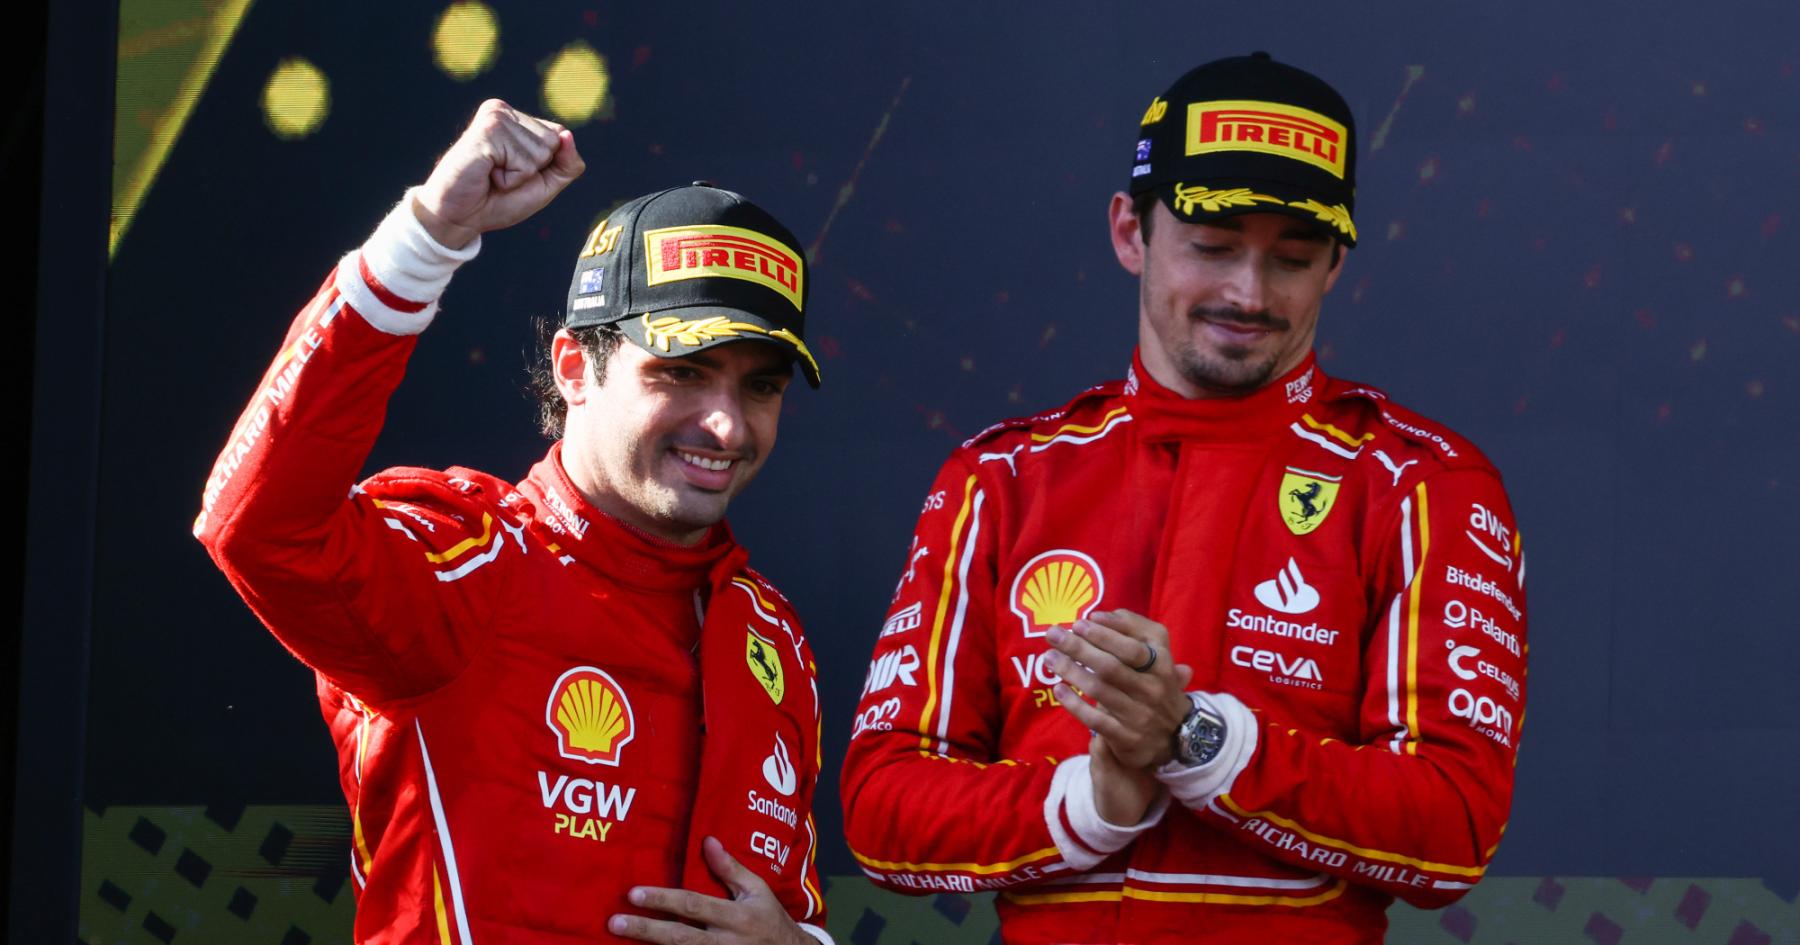 Racing Rivalry Revived: Ferrari's Pursuit of Perfection Against Red Bull